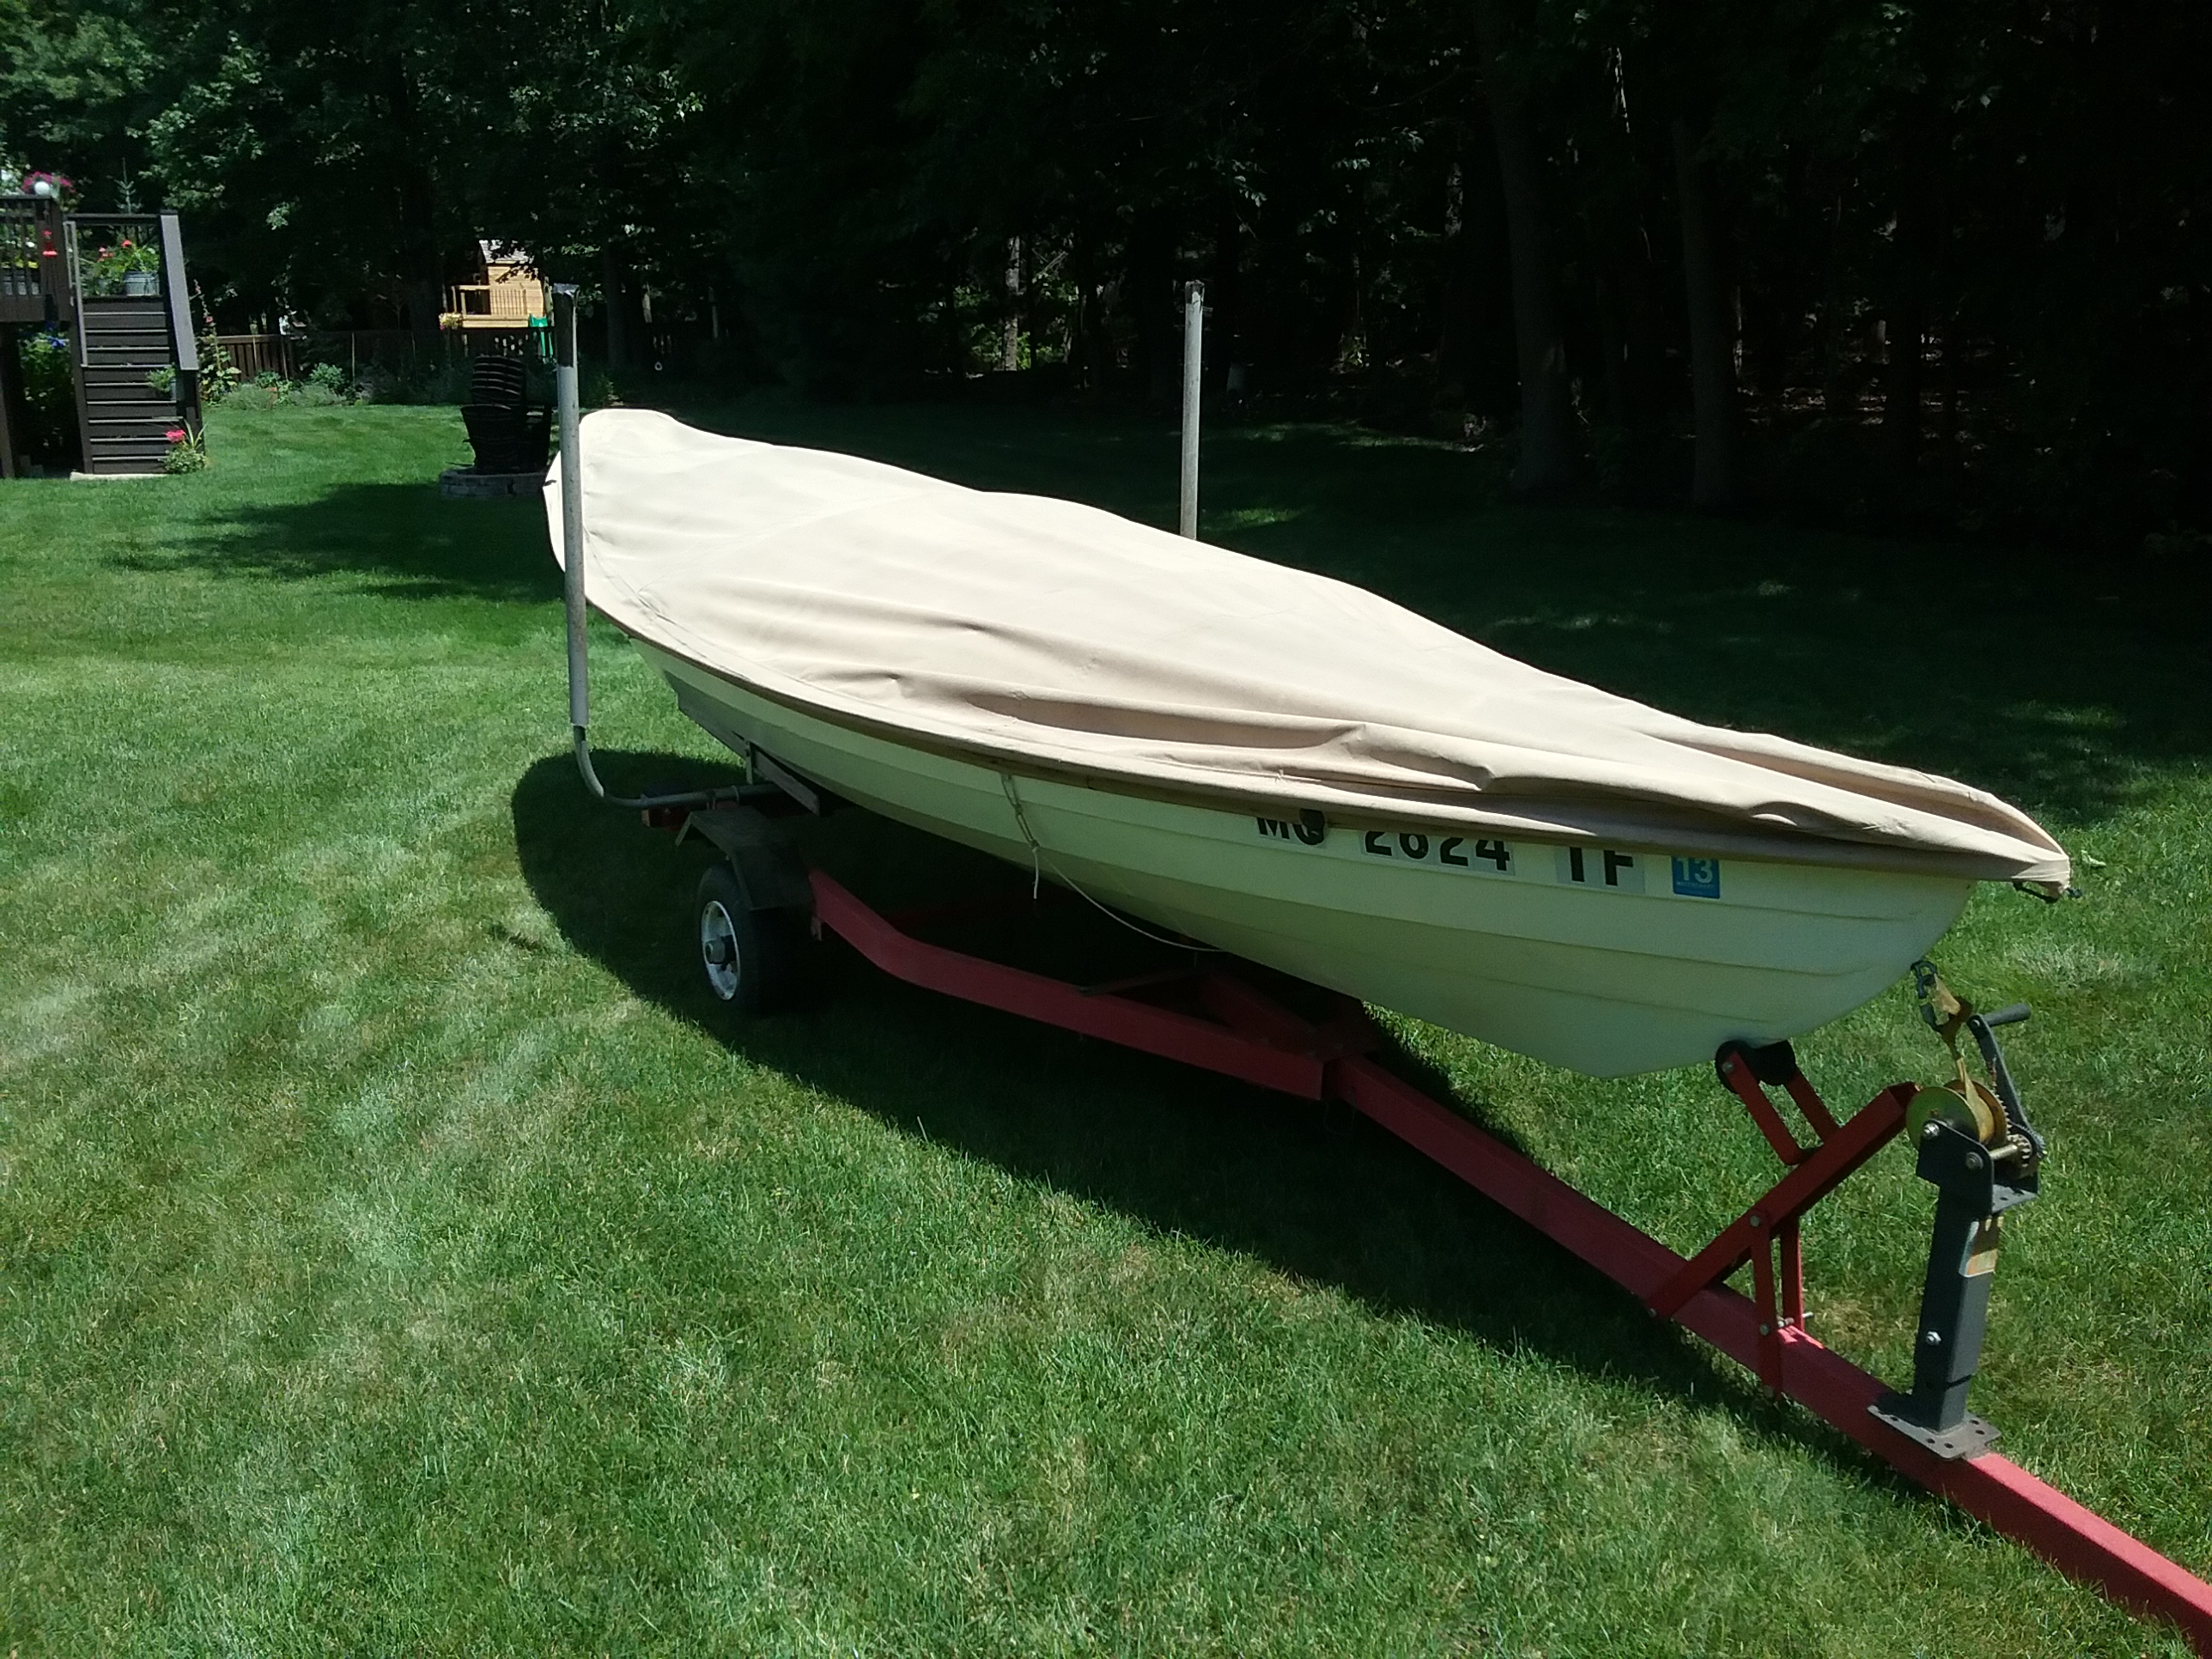 2009 17 foot Chesapeake northeaster dory Rowboat for sale in Grand Haven, MI - image 2 